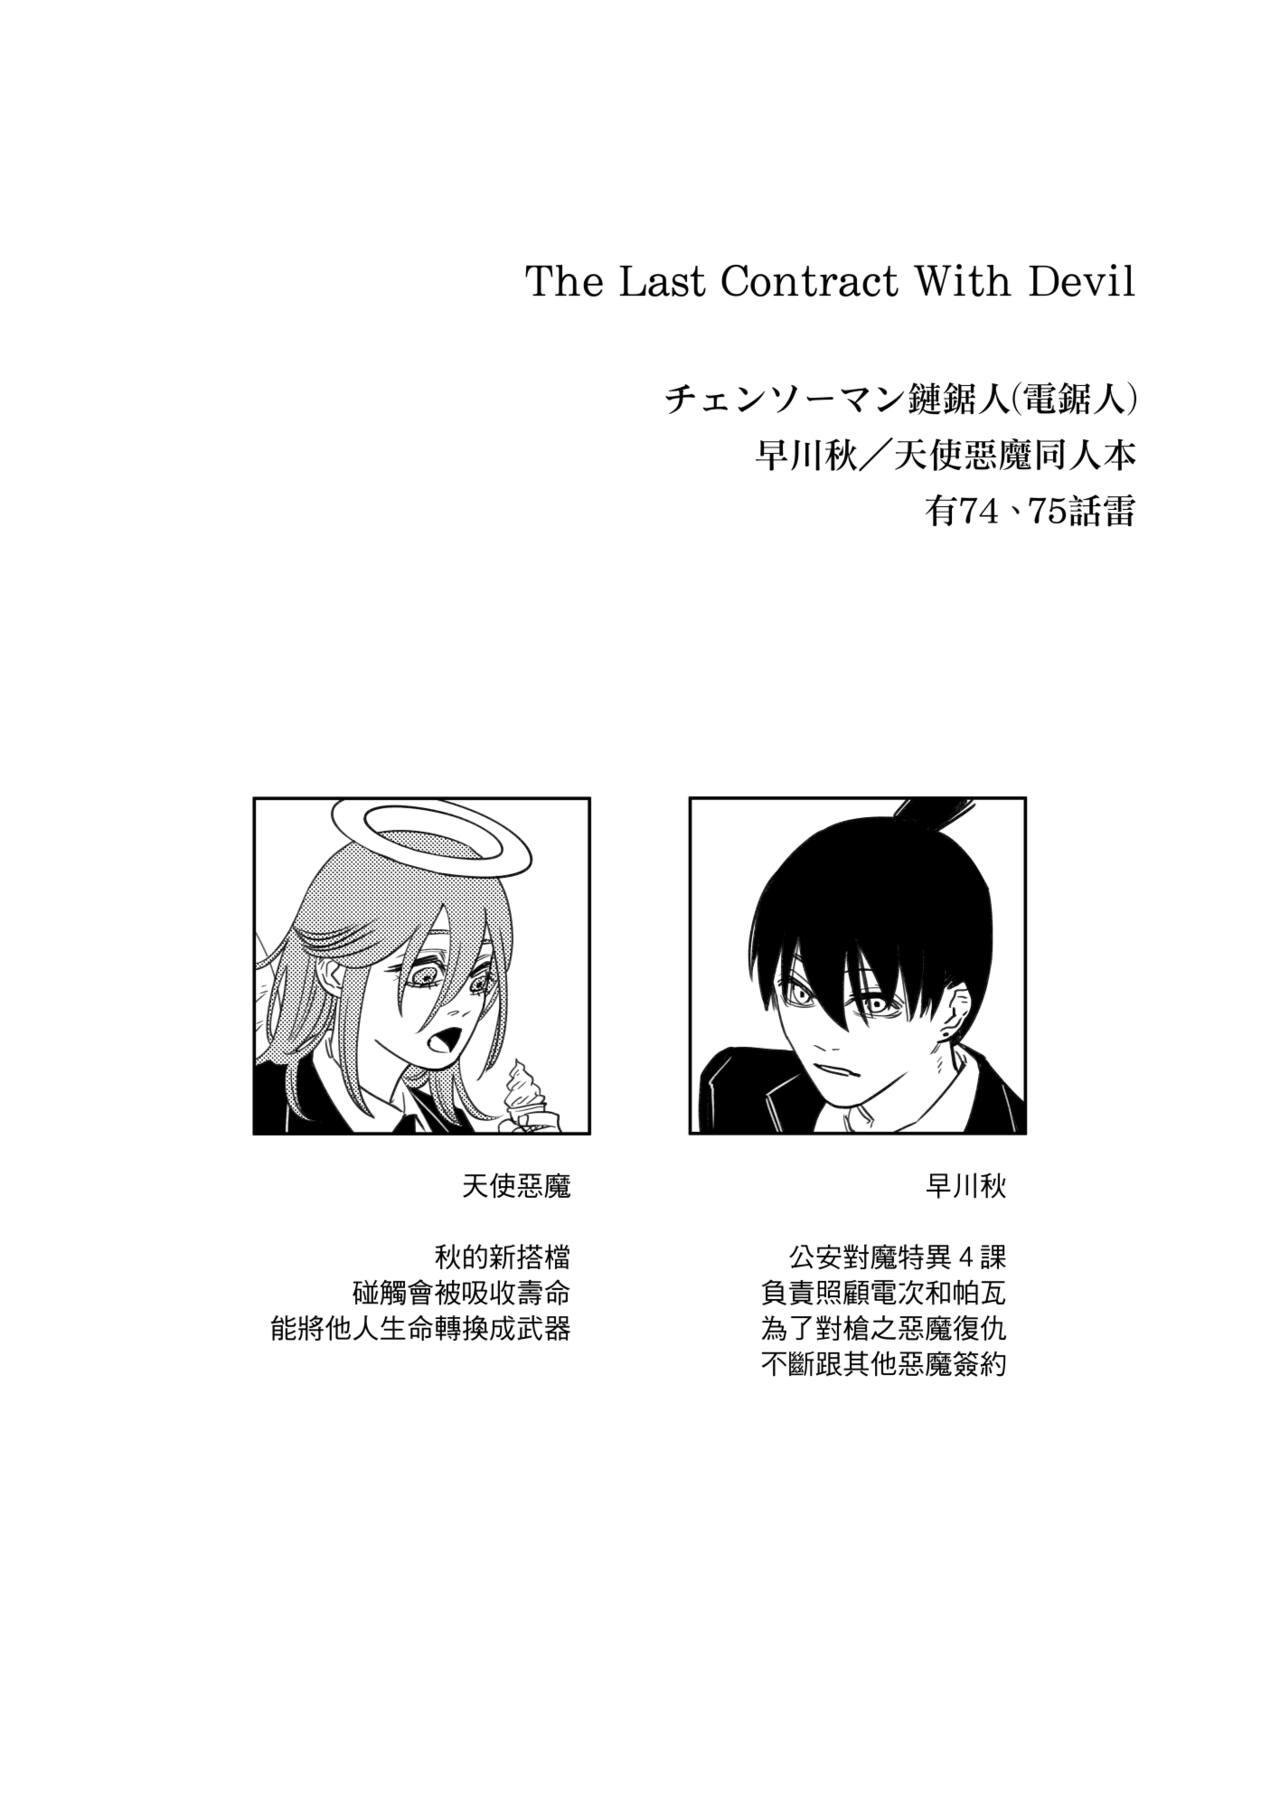 Selfie The Last Contract With Devil - Chainsaw man Gang Bang - Picture 3